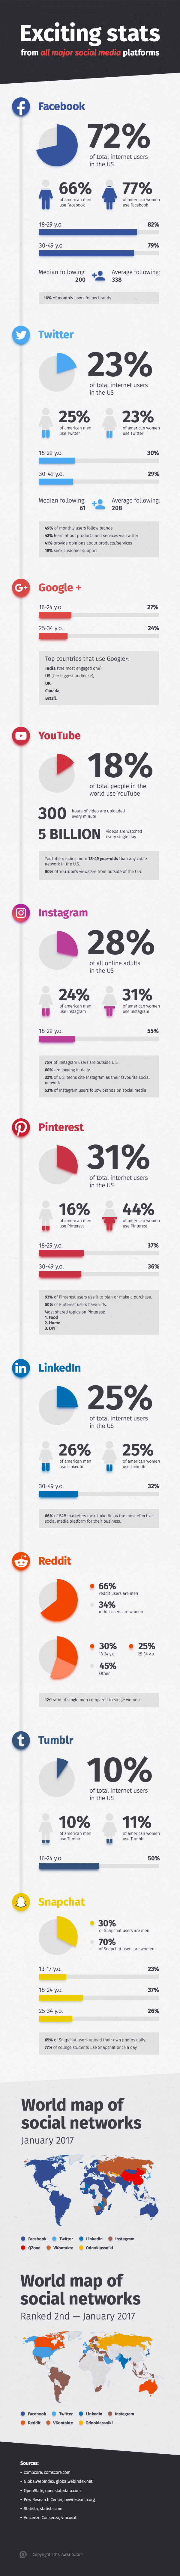 Exciting Stats From All Major Social Media Platforms - #infographic